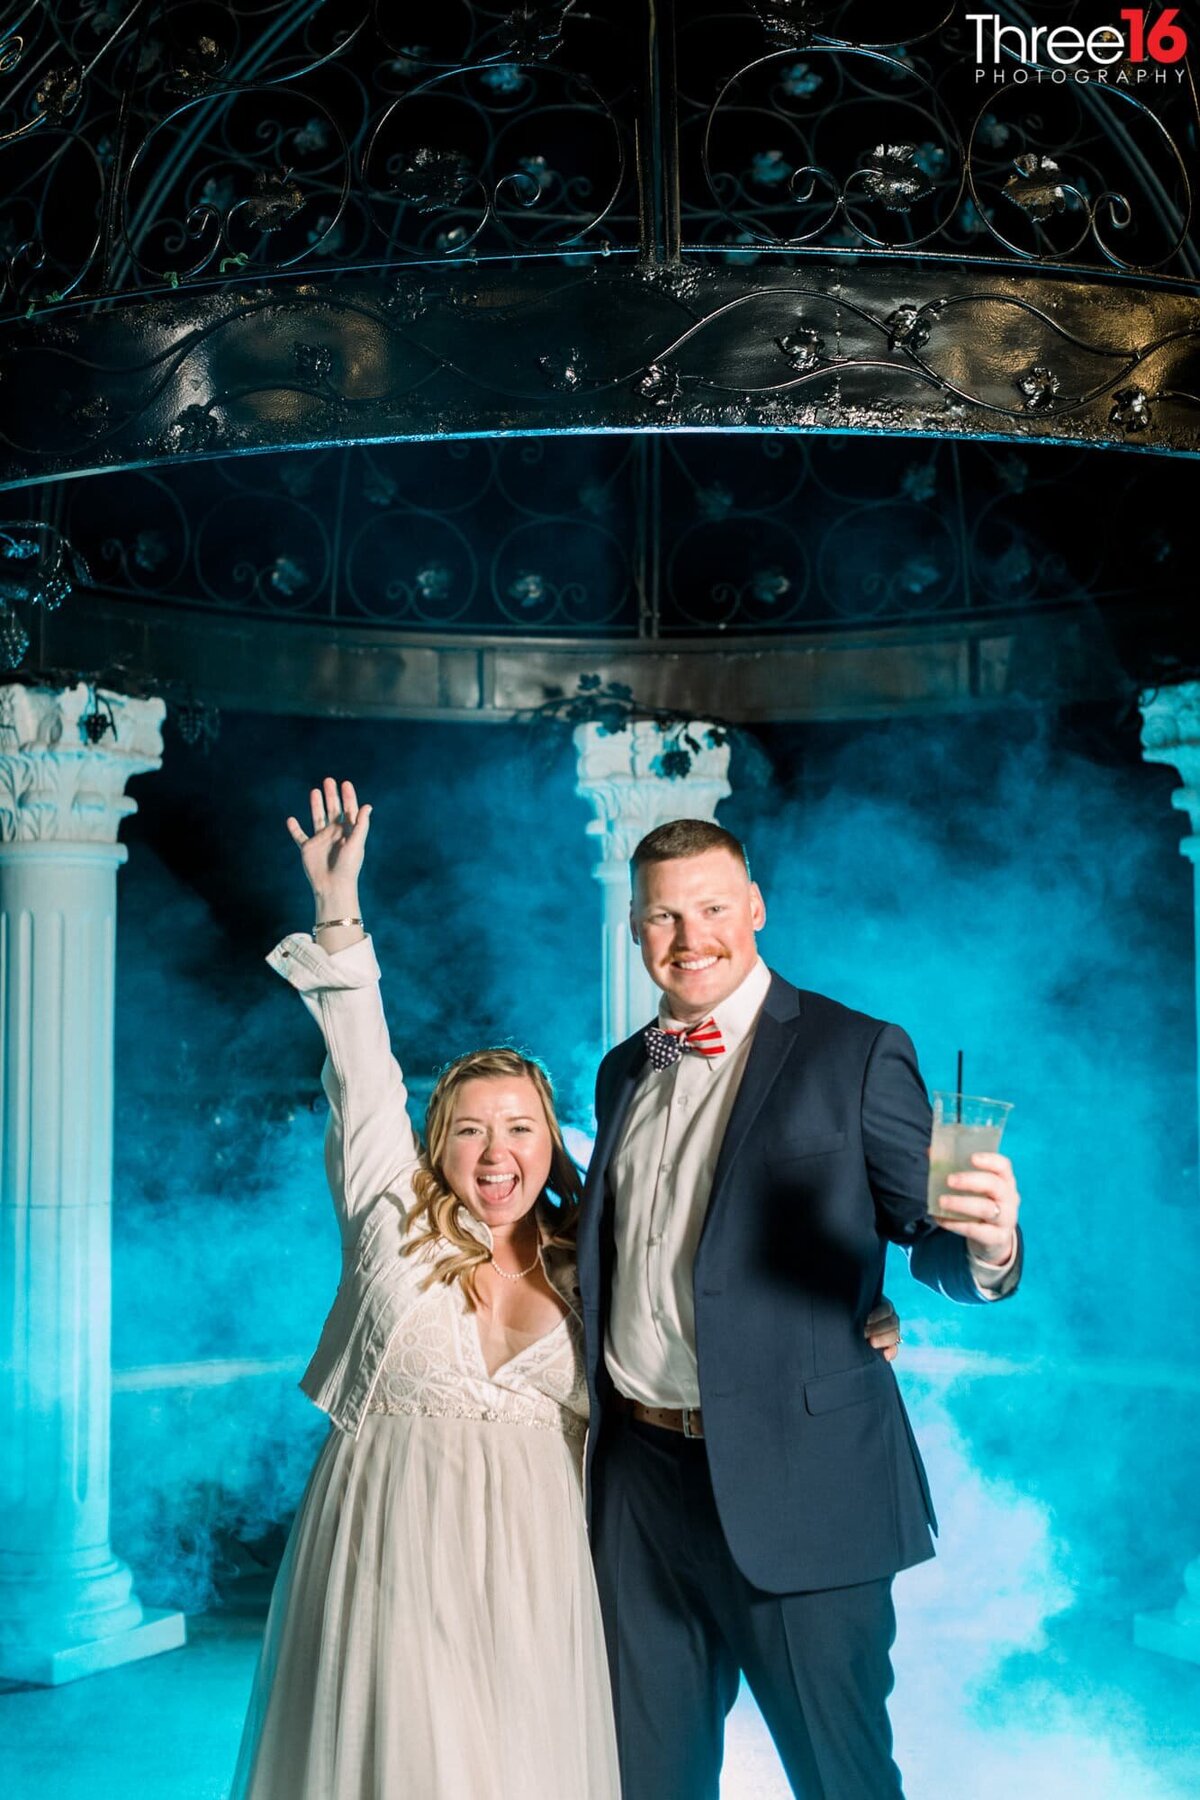 Bride and Groom celebrate to the photographer with blue mist behind them